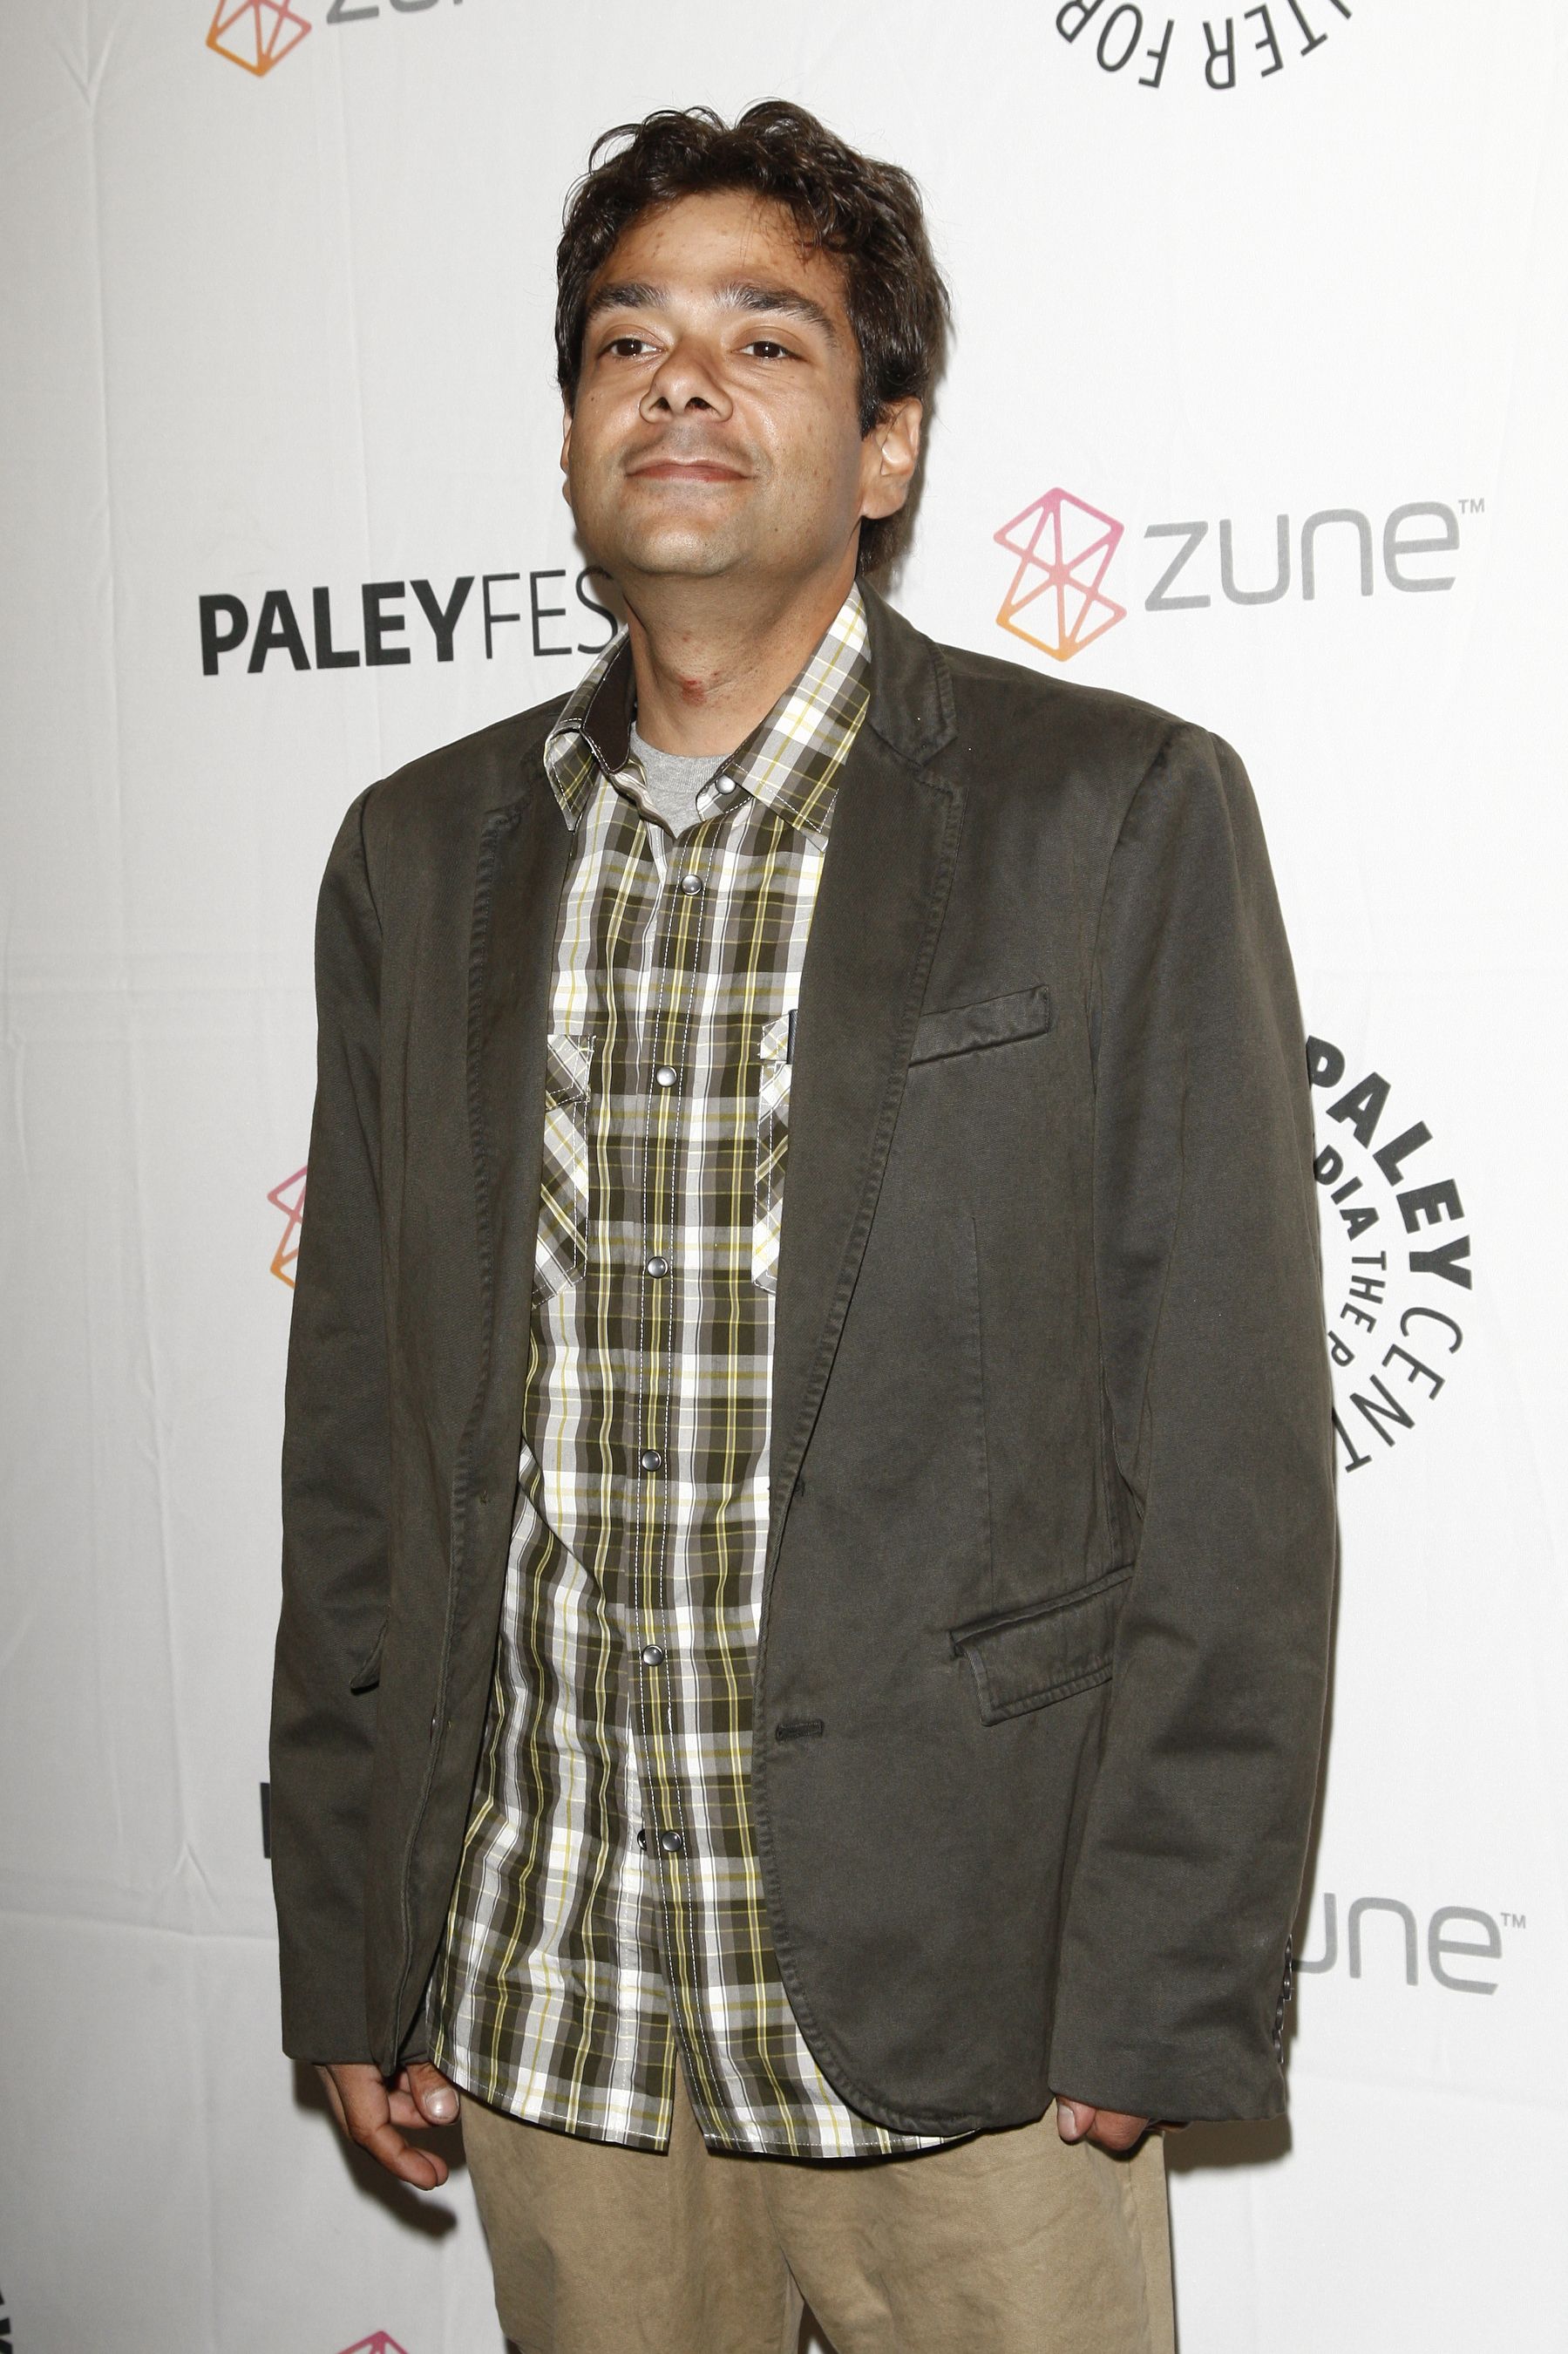 Shaun Weiss during the Paleyfest 2011 event in Beverly Hills, California on March 12, 2011. | Source: Getty Images